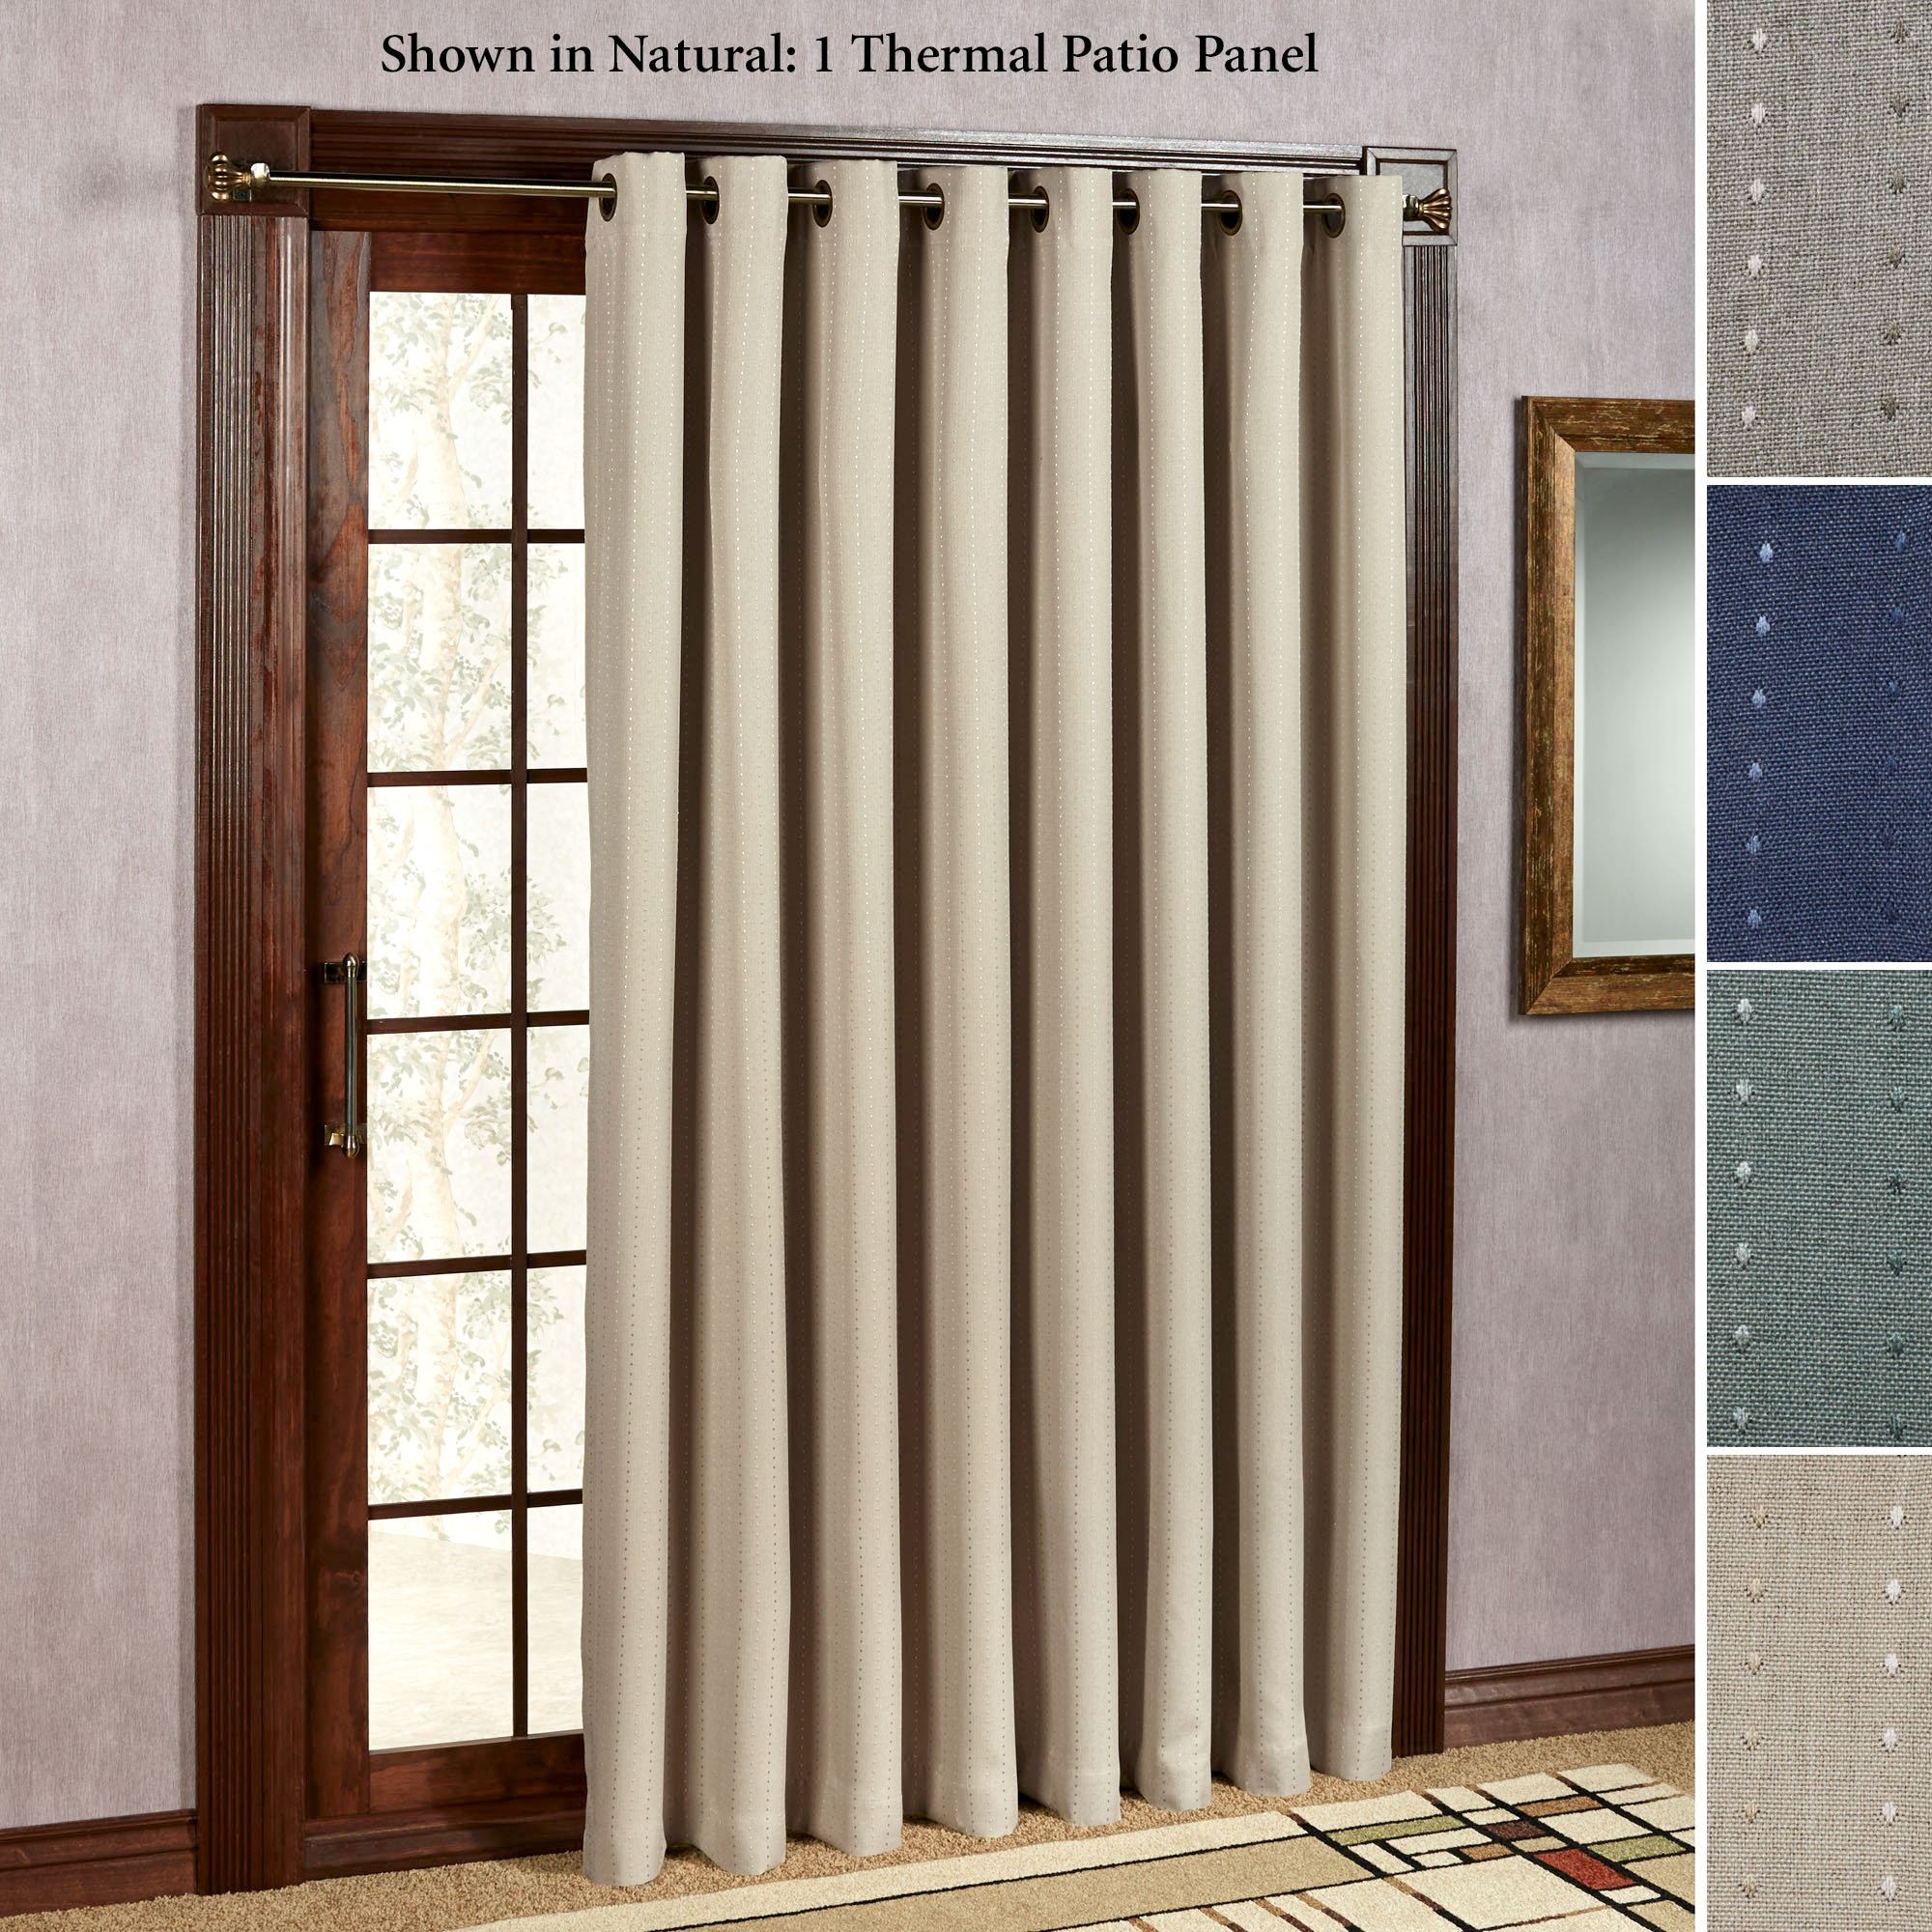 Insulated Shades For Sliding Glass Doorspatio door curtain panels touch of class